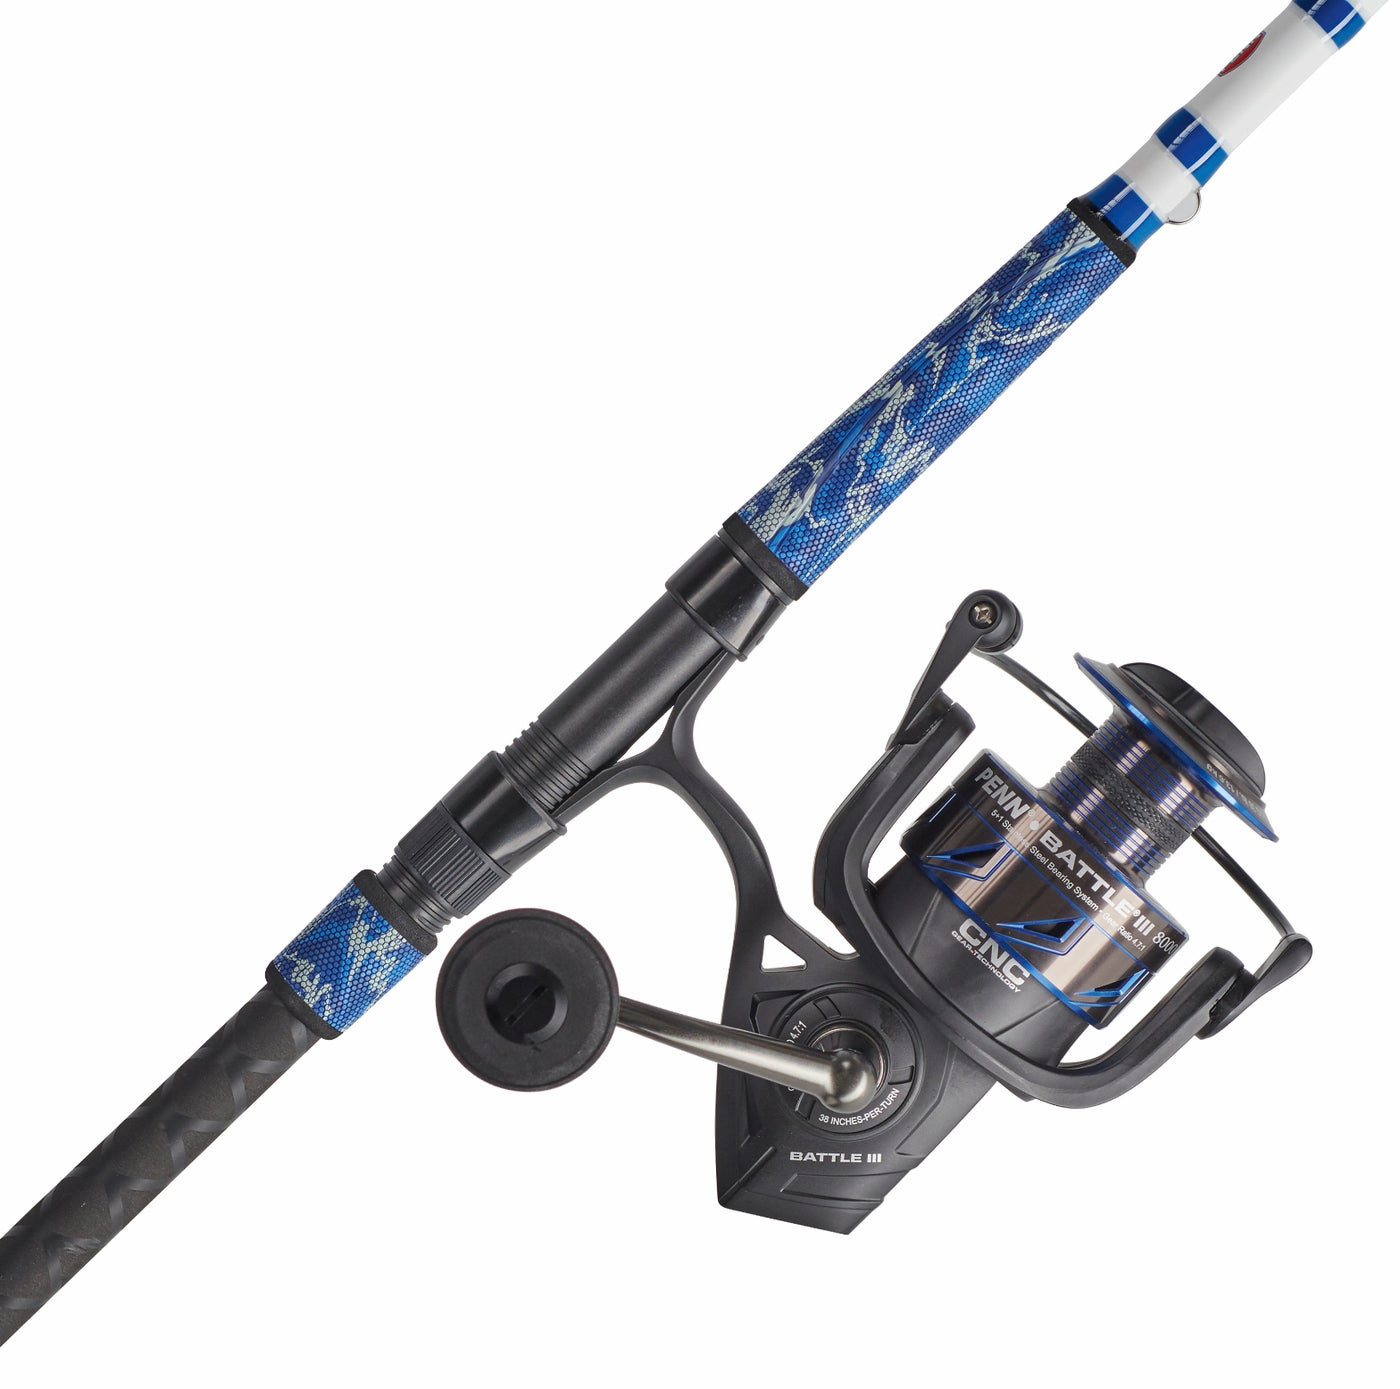 Spinning Reel Fishing Reels  1000XH/2000XH/2500XH/3000CXH/4000CXH/5000CXH/6000H 3+1BB High Speed Wheel  Fishing Tackle Combo, Spinning Reels 